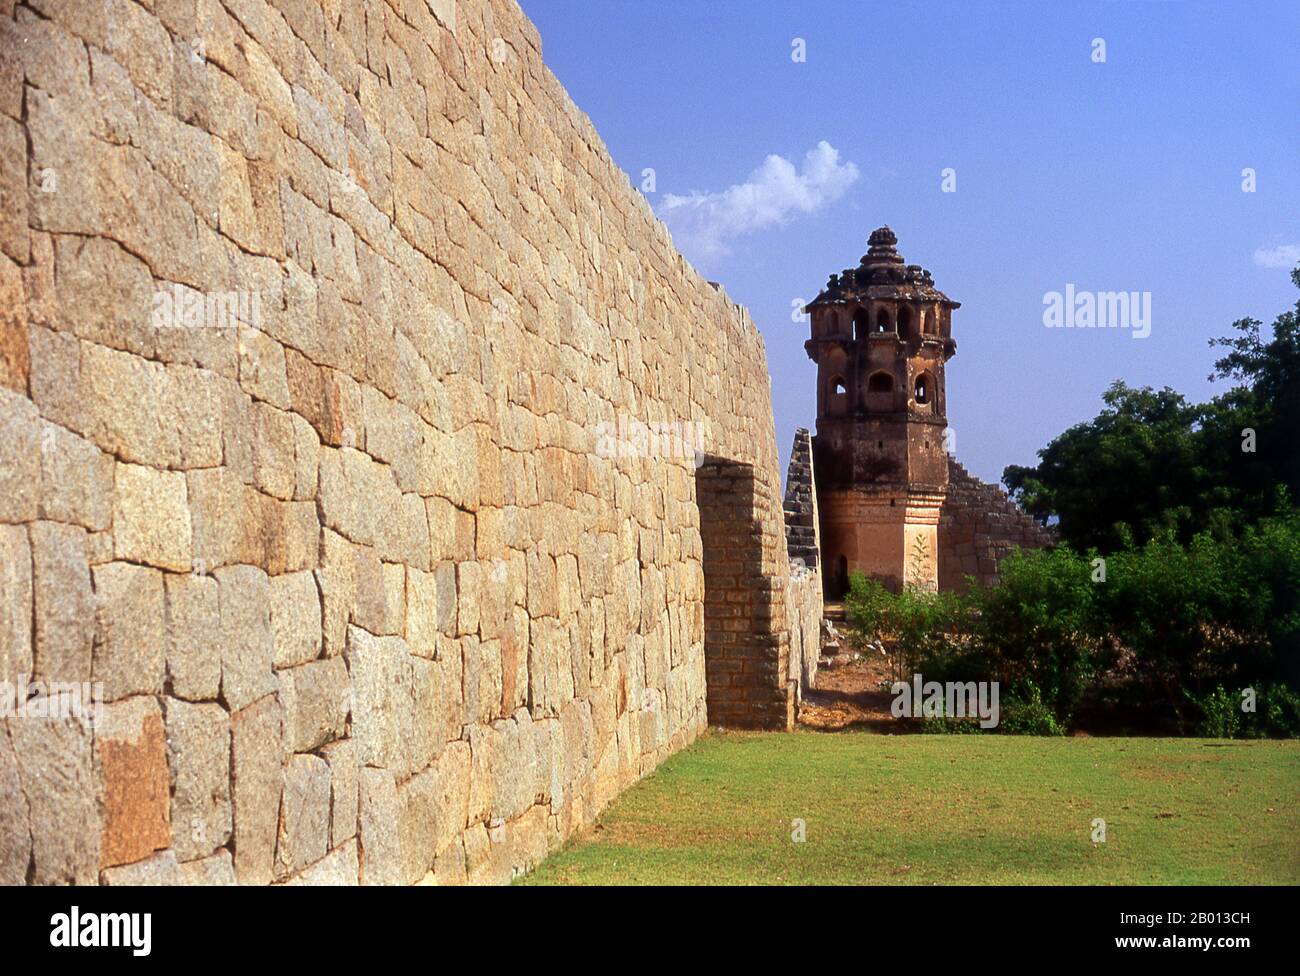 India: A watch tower at the Zenana Enclosure, Hampi, Karnataka State.  The Zenana Enclosure is a walled compound that originally housed the women of the royal household.  Hampi is a village in northern Karnataka state. It is located within the ruins of Vijayanagara, the former capital of the Vijayanagara Empire. Predating the city of Vijayanagara, it continues to be an important religious centre, housing the Virupaksha Temple, as well as several other monuments belonging to the old city. Stock Photo